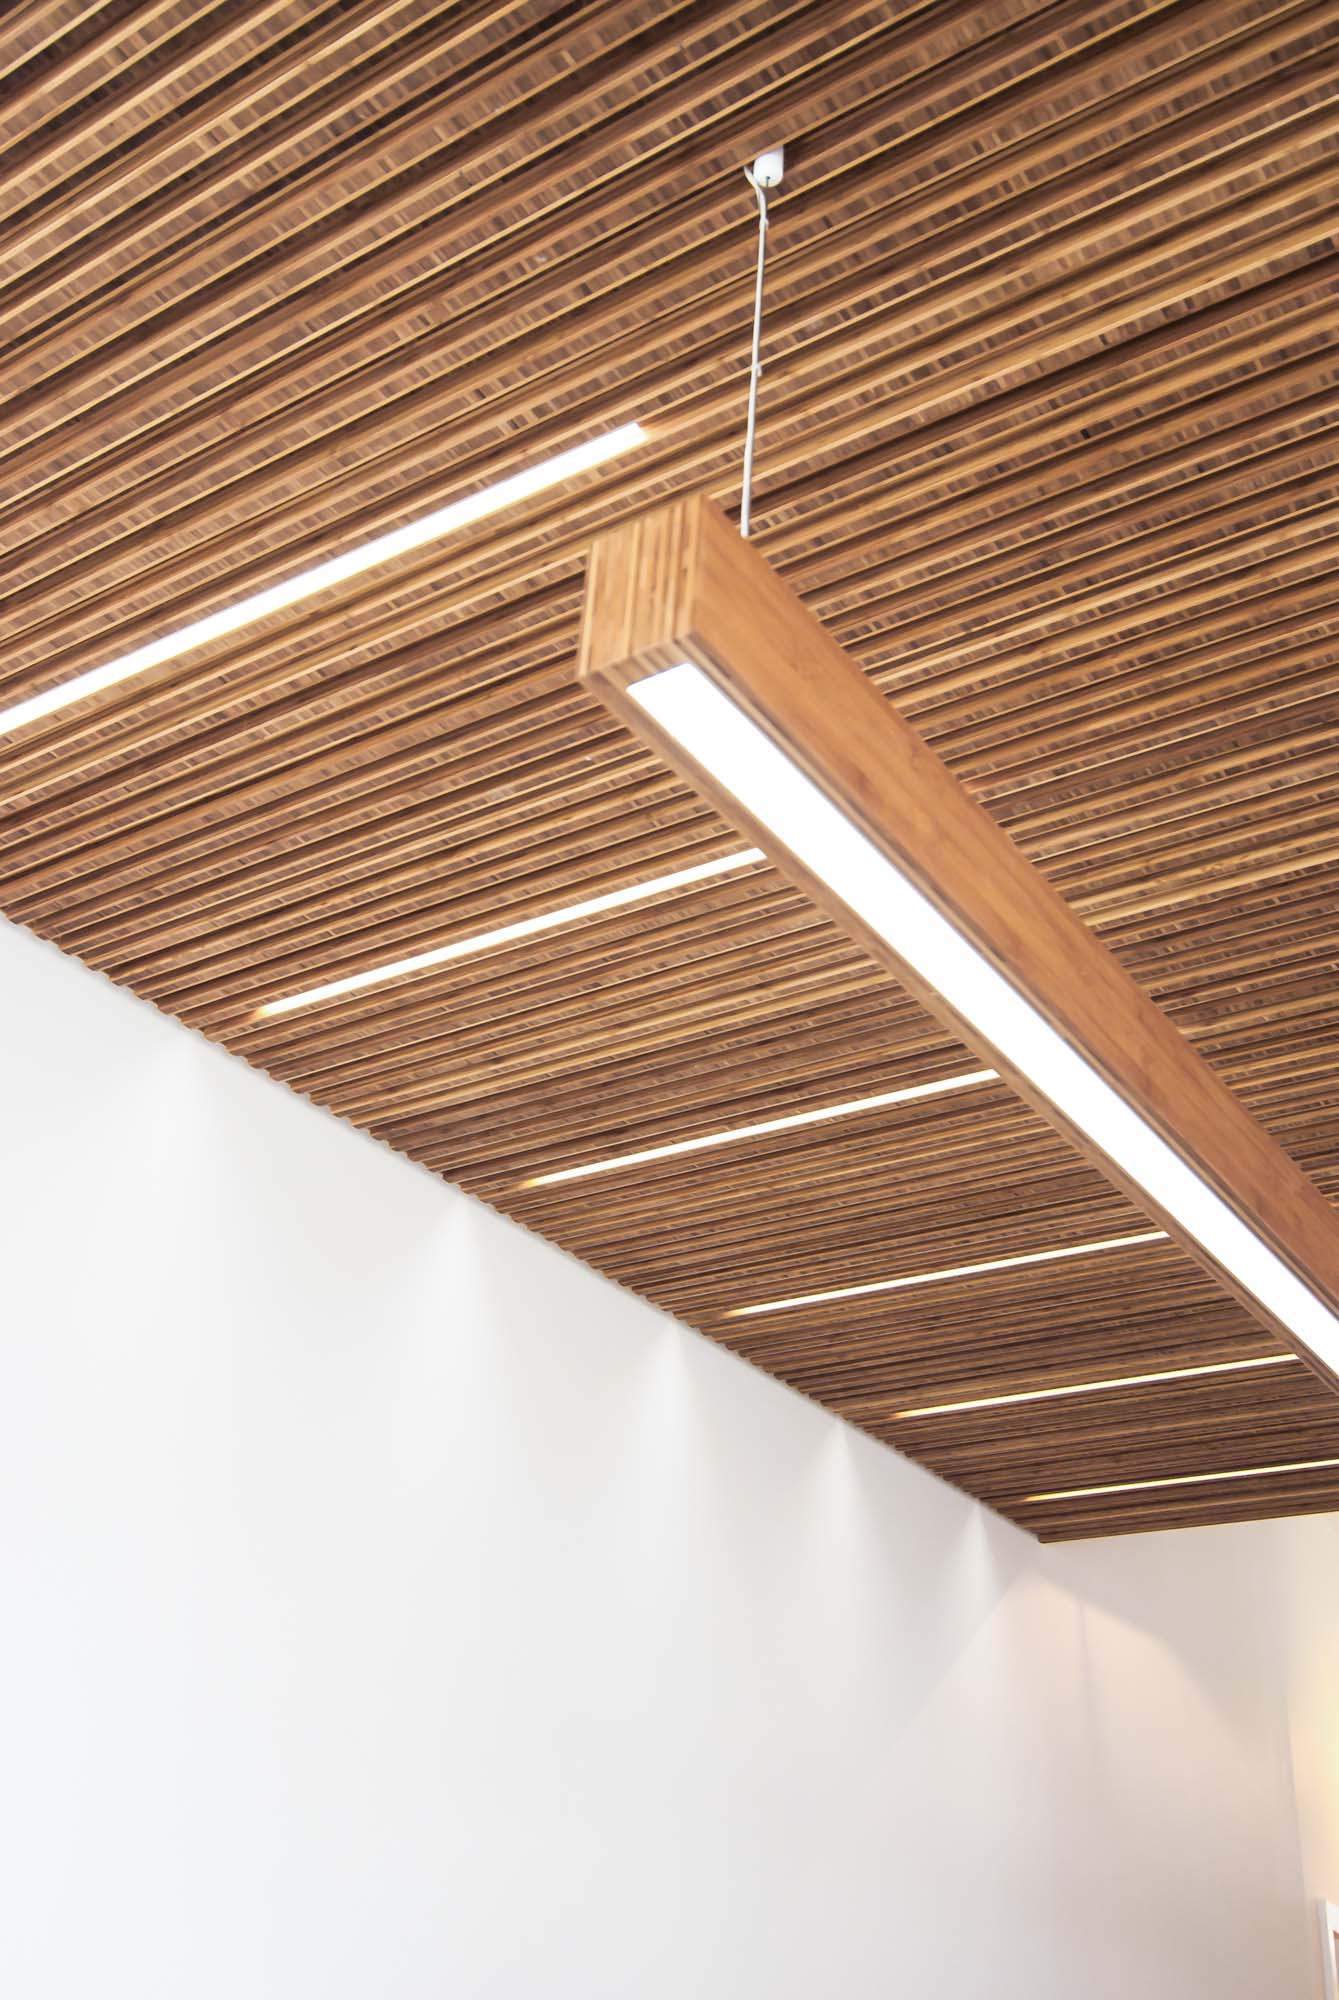 A close up of the Bamboo Plyboo joinery along LED light strips incorporated in the ceiling.